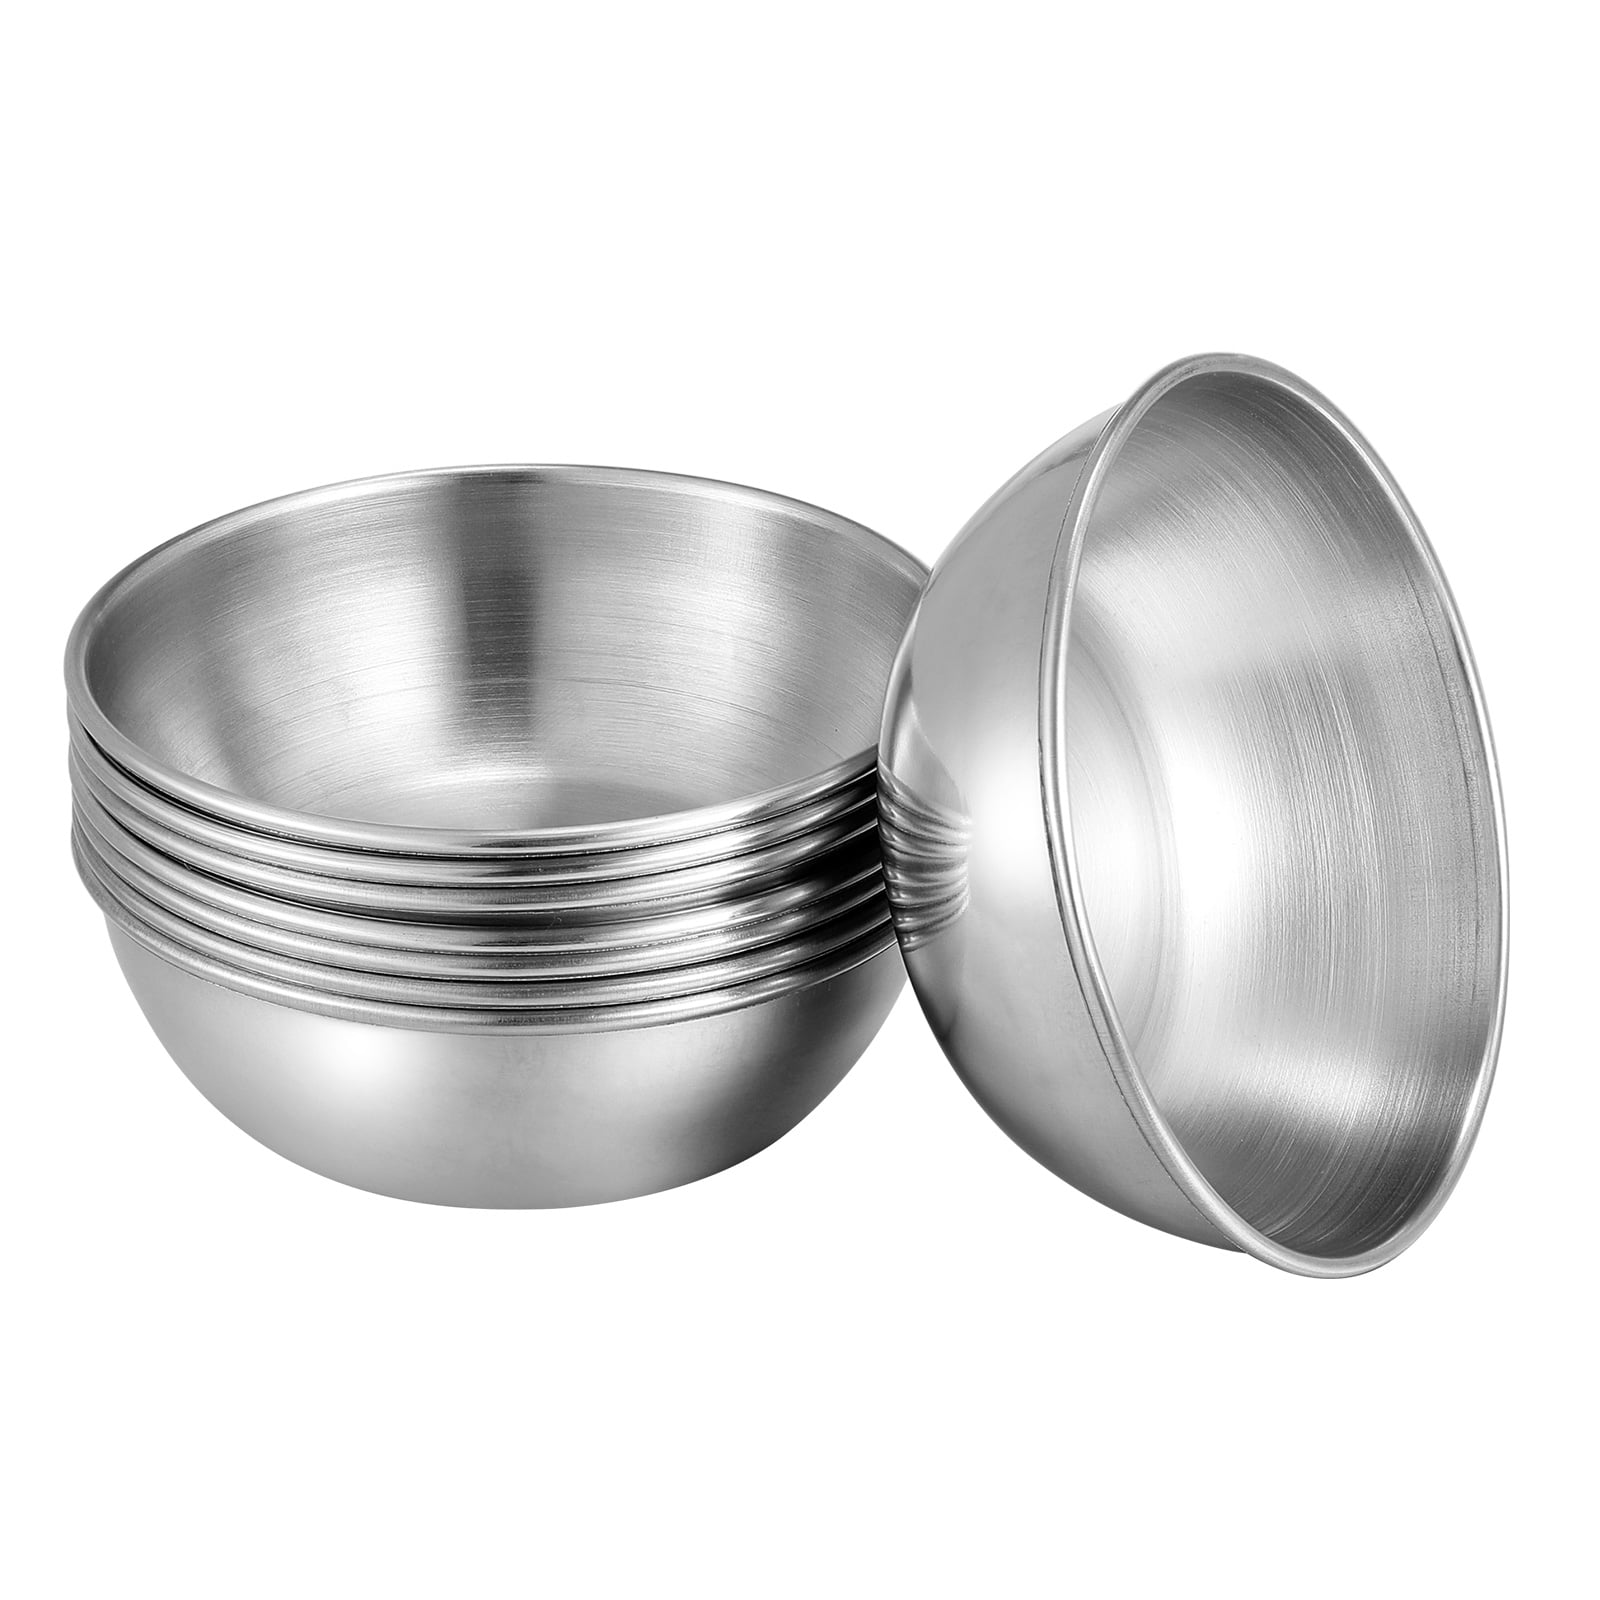 Stainless Steel Seasoning Dish Sauce Snack Plates Dip Dishes Saucer Tray Divided